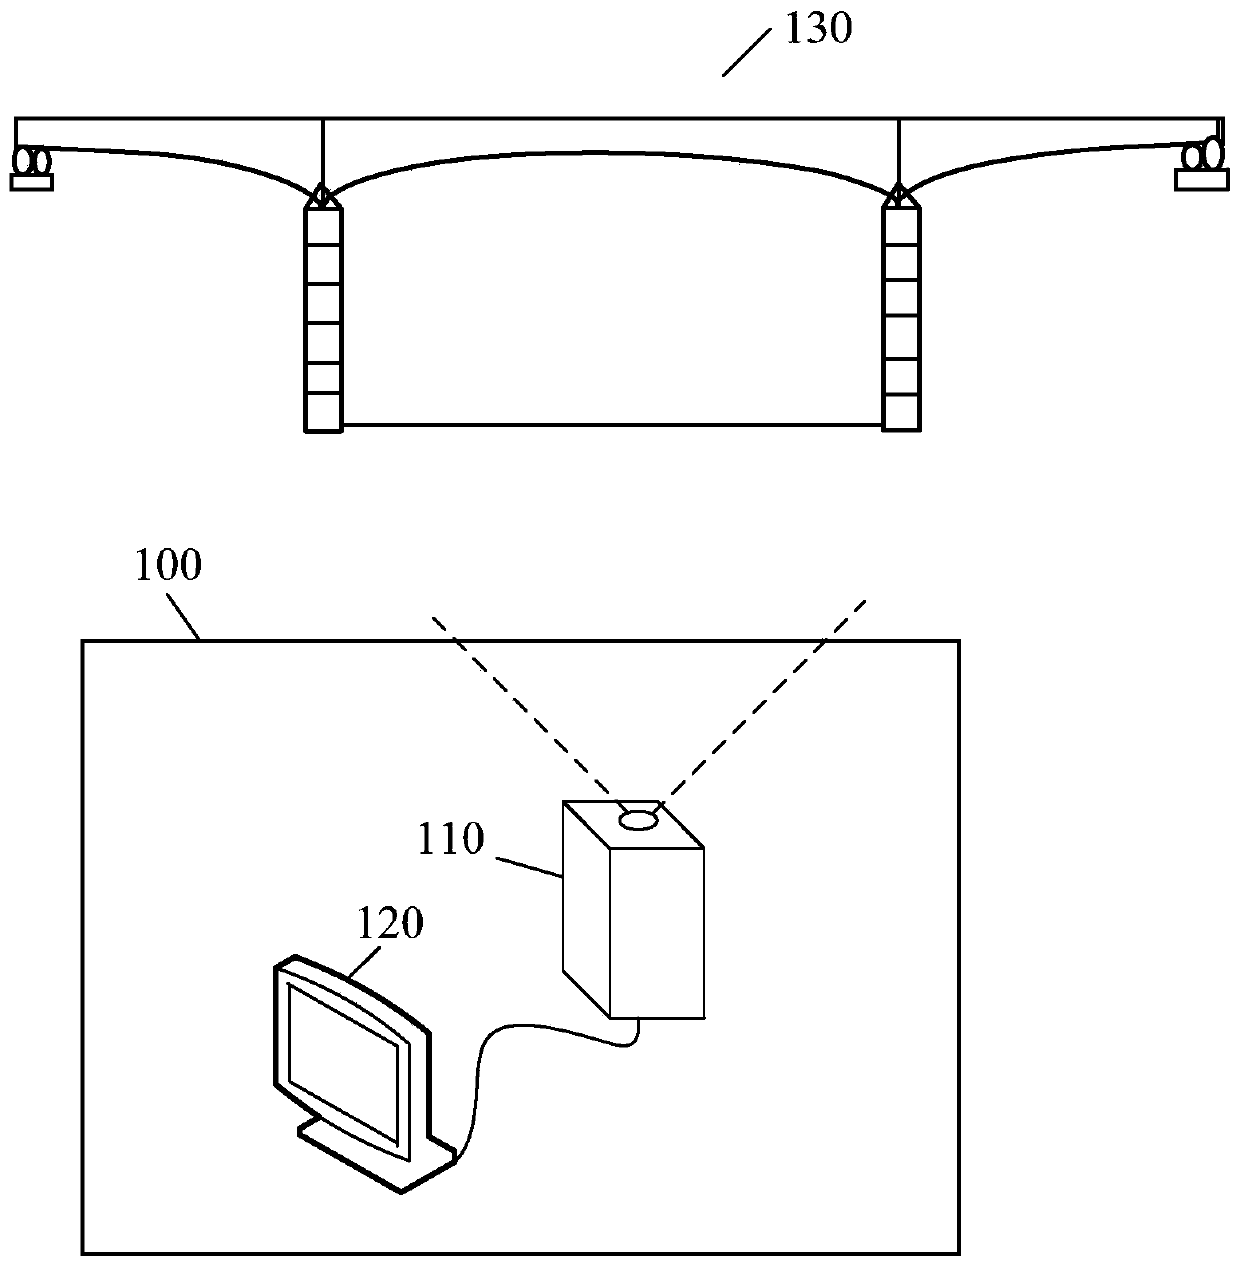 Bridge vibration detection method and related devices